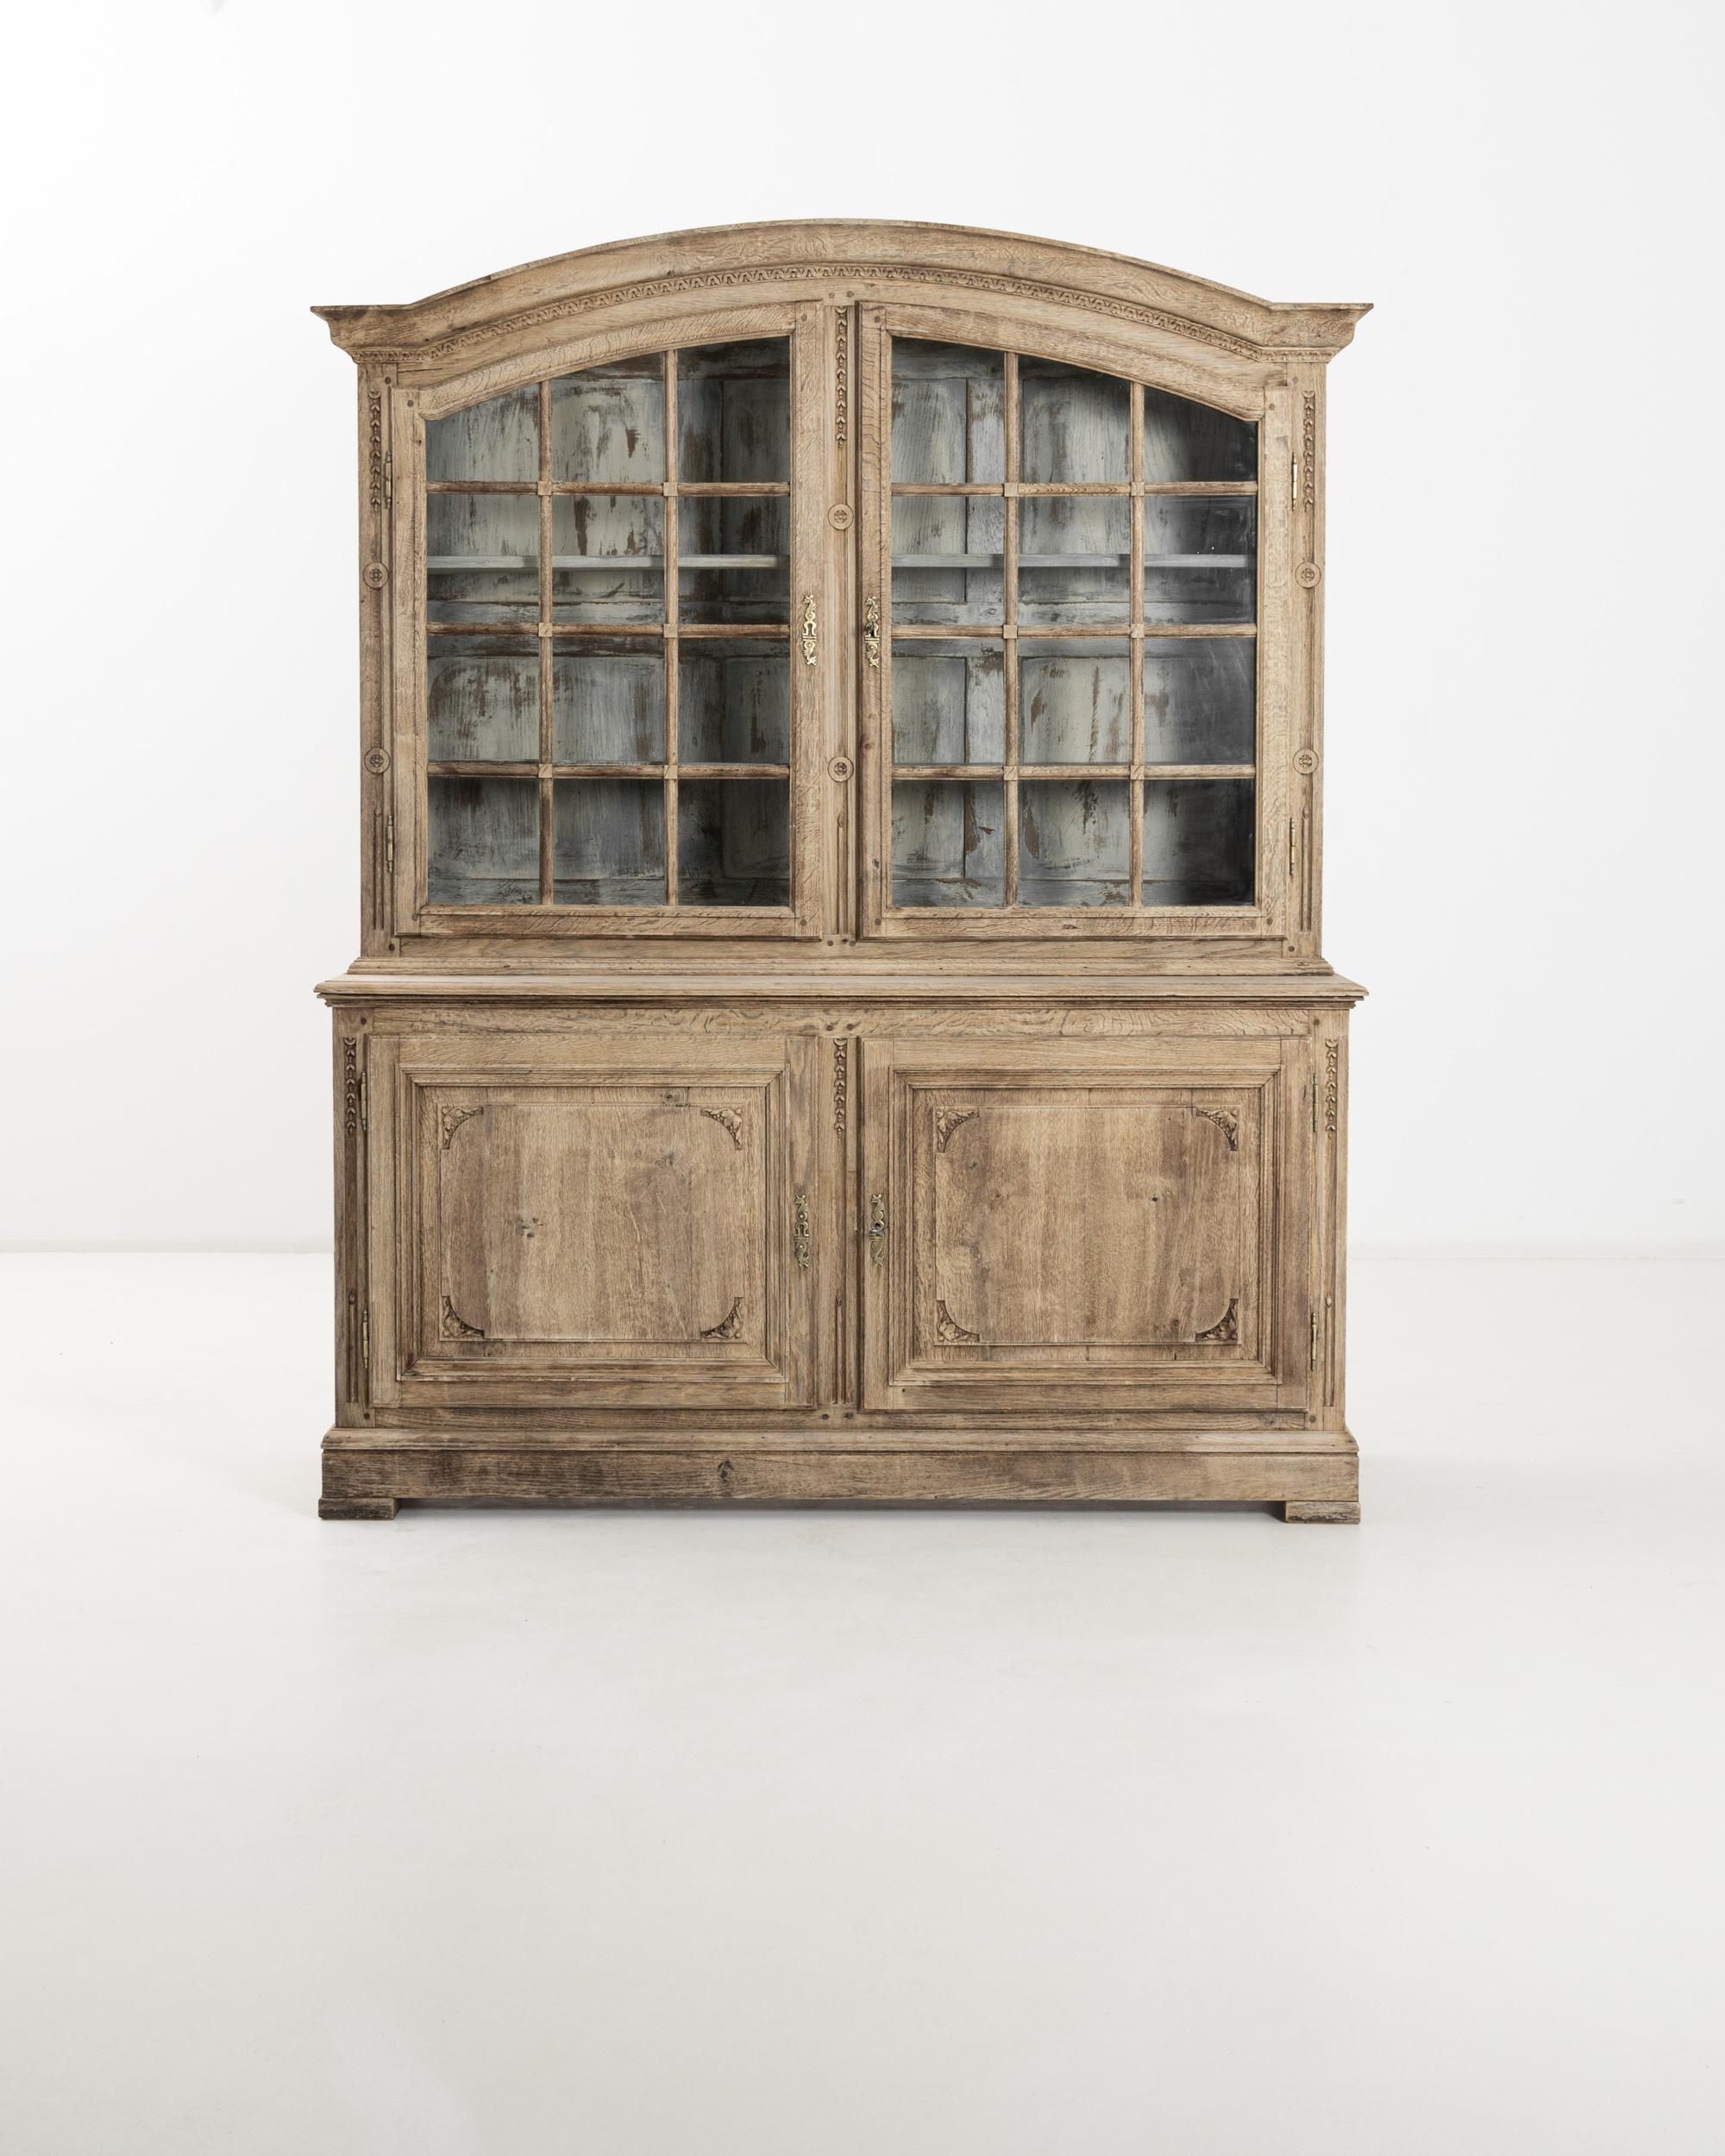 Carved details add glimmers of delight to this antique French Country vitrine. Made in Revolutionary France circa 1800, motifs of four-petalled flowers and languid garlands decorate the arched oak frame. Slender candles sporting tiny flames are